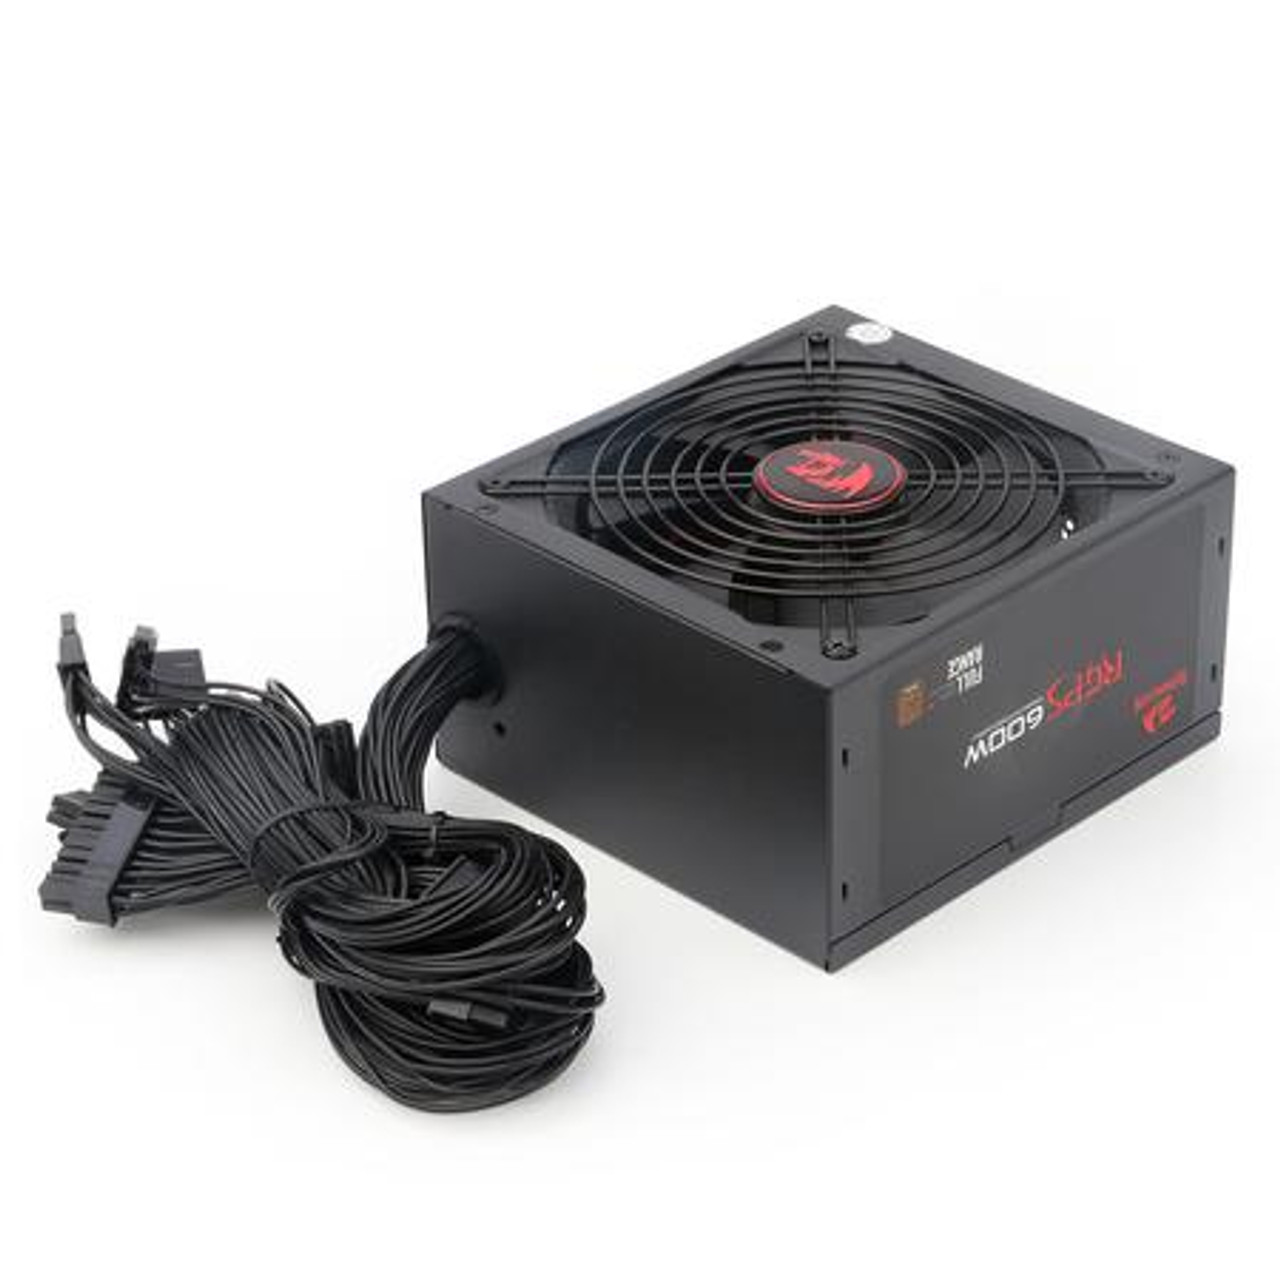 Luftpost Mountaineer Efterligning Redragon PS002 600W Gaming PC Power Supply | PS002 | AYOUB COMPUTERS |  LEBANON